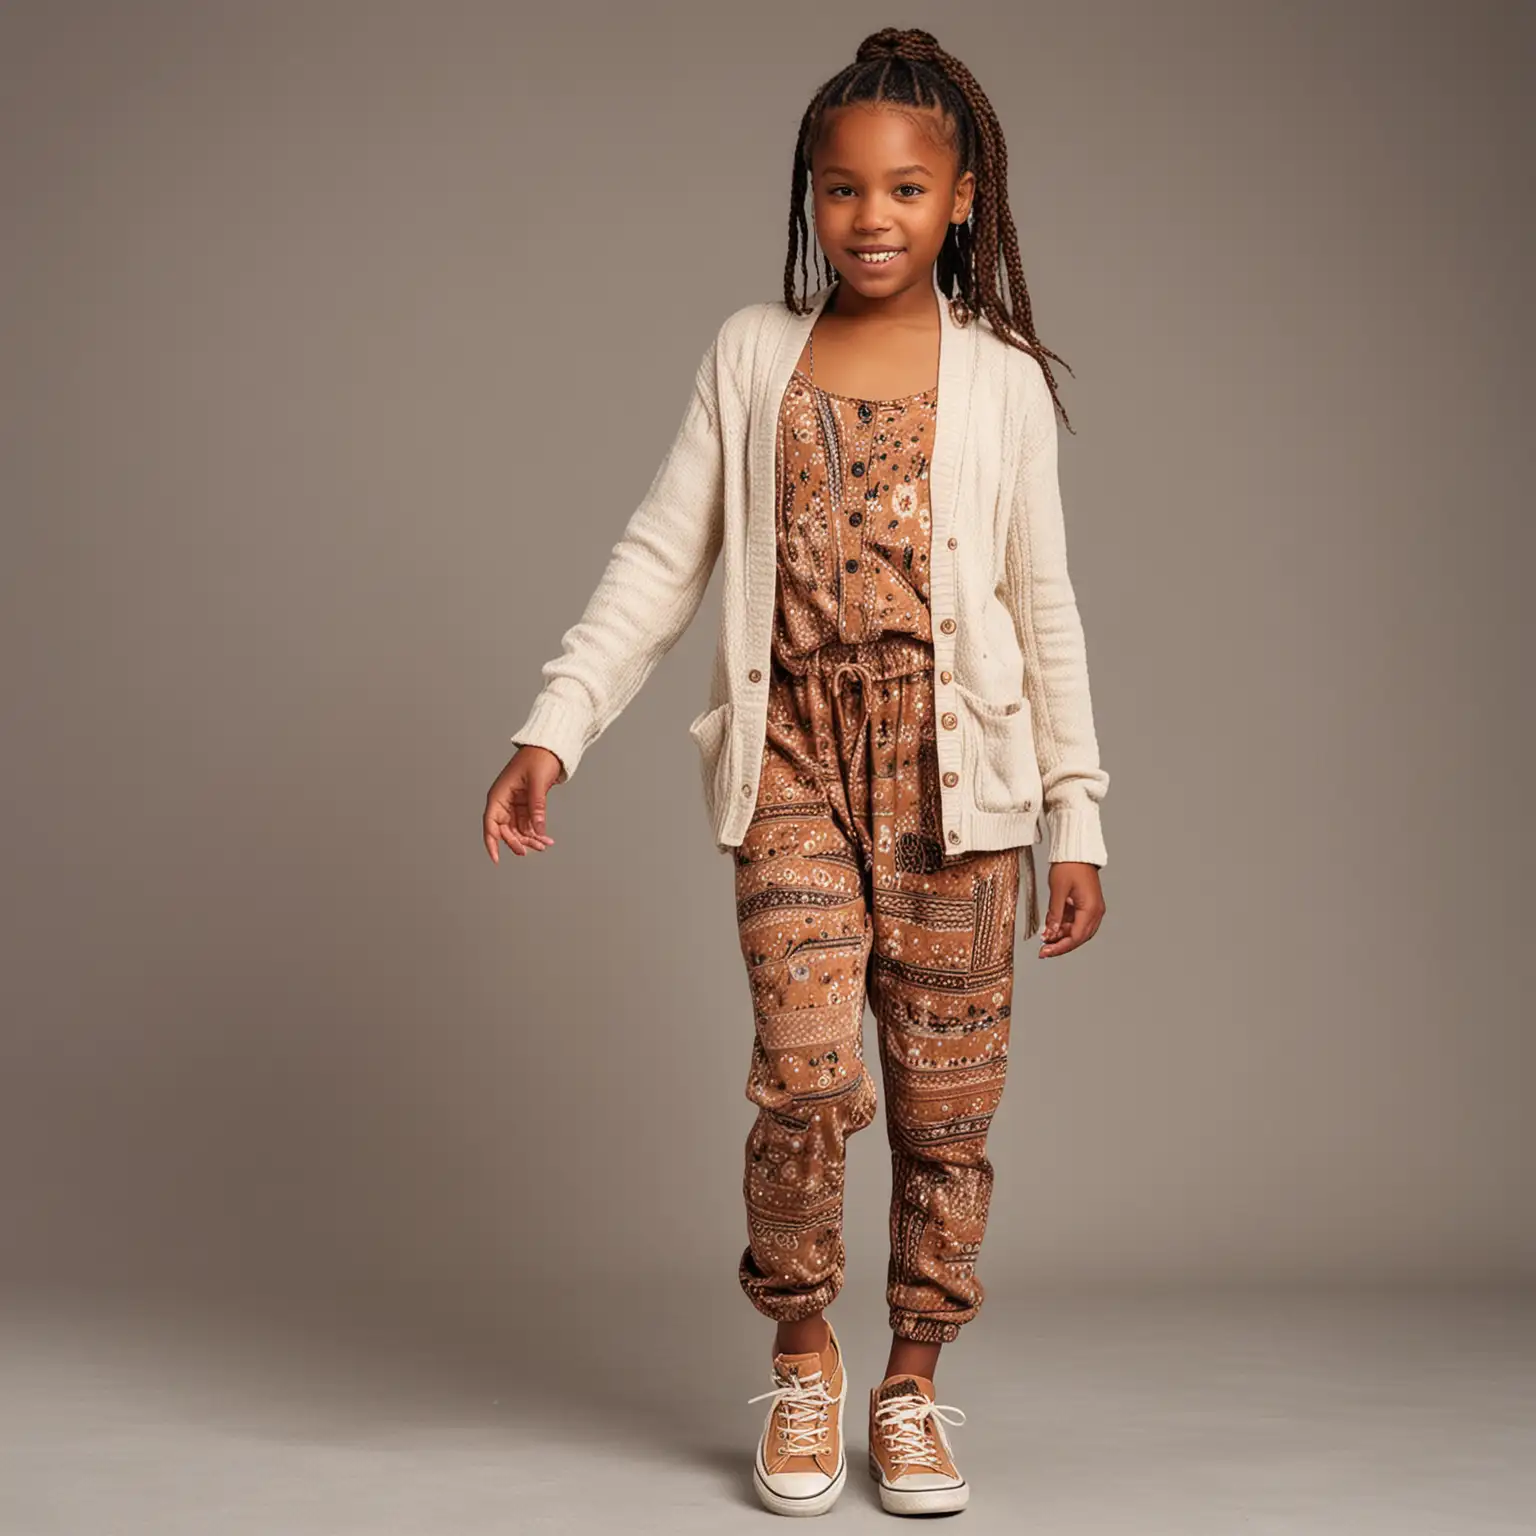  A 12-year-old black girl with braided hair dressed in cute boho jumpsuit and cardigan and tan or beige chucks. full-length portrait
